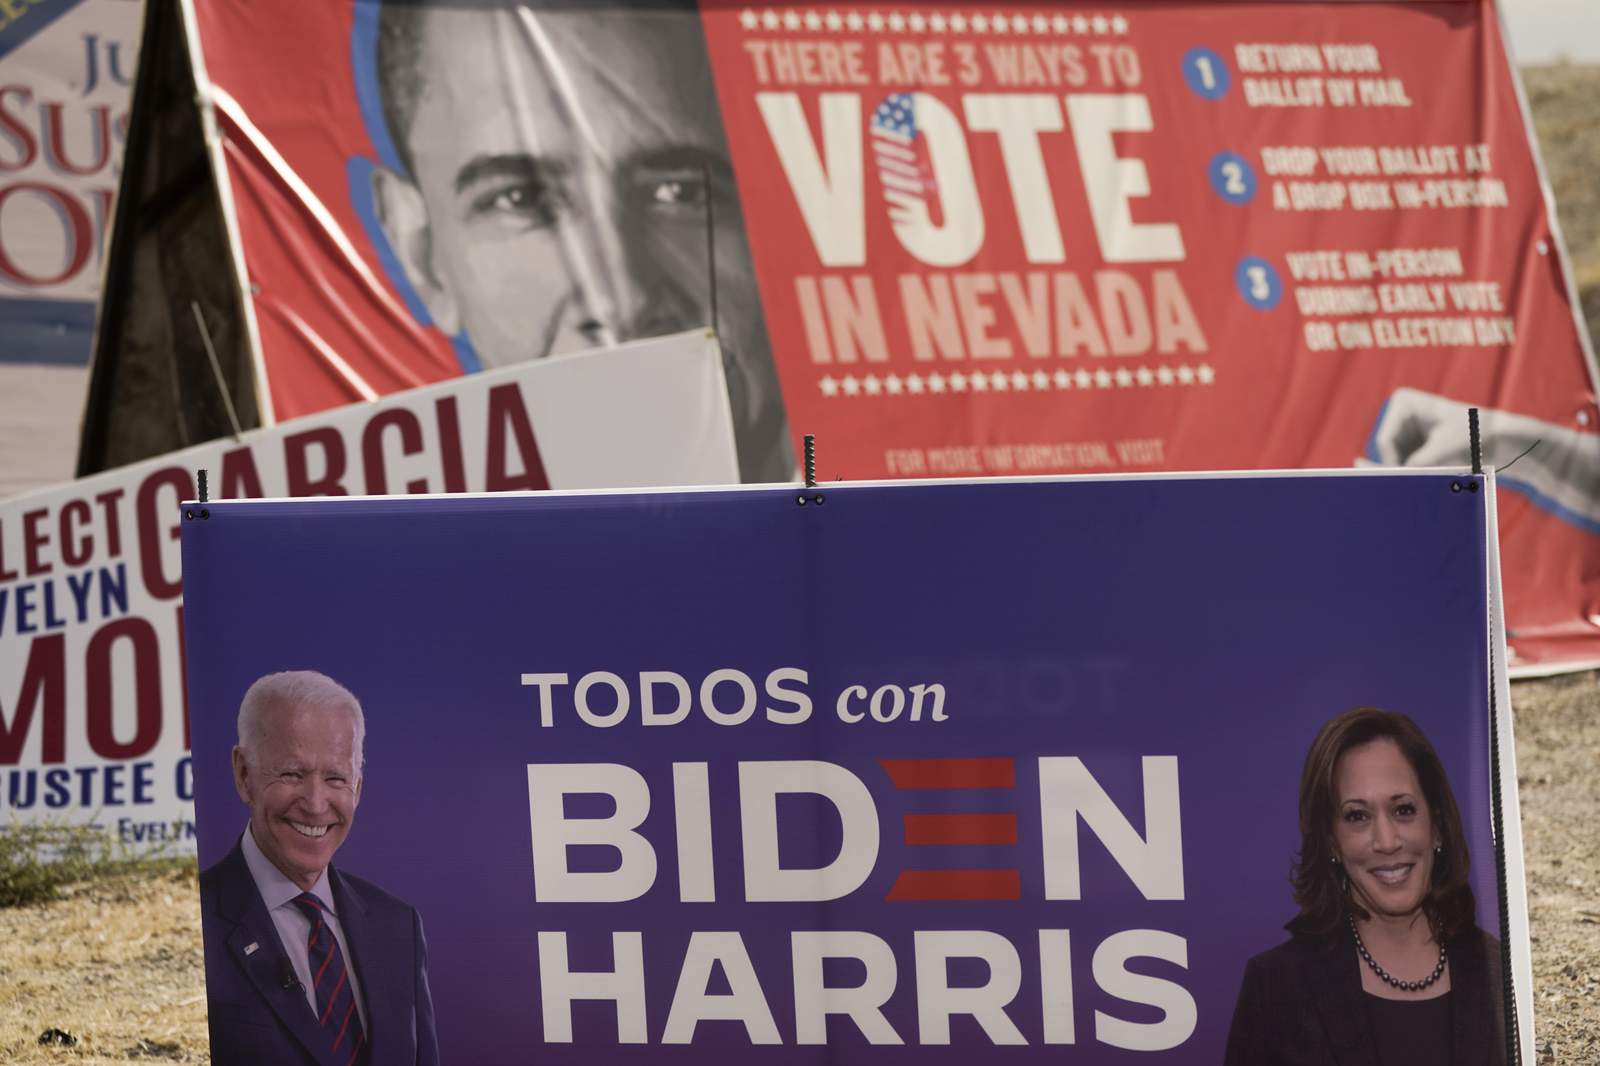 How to build a government: Transition challenges await Biden